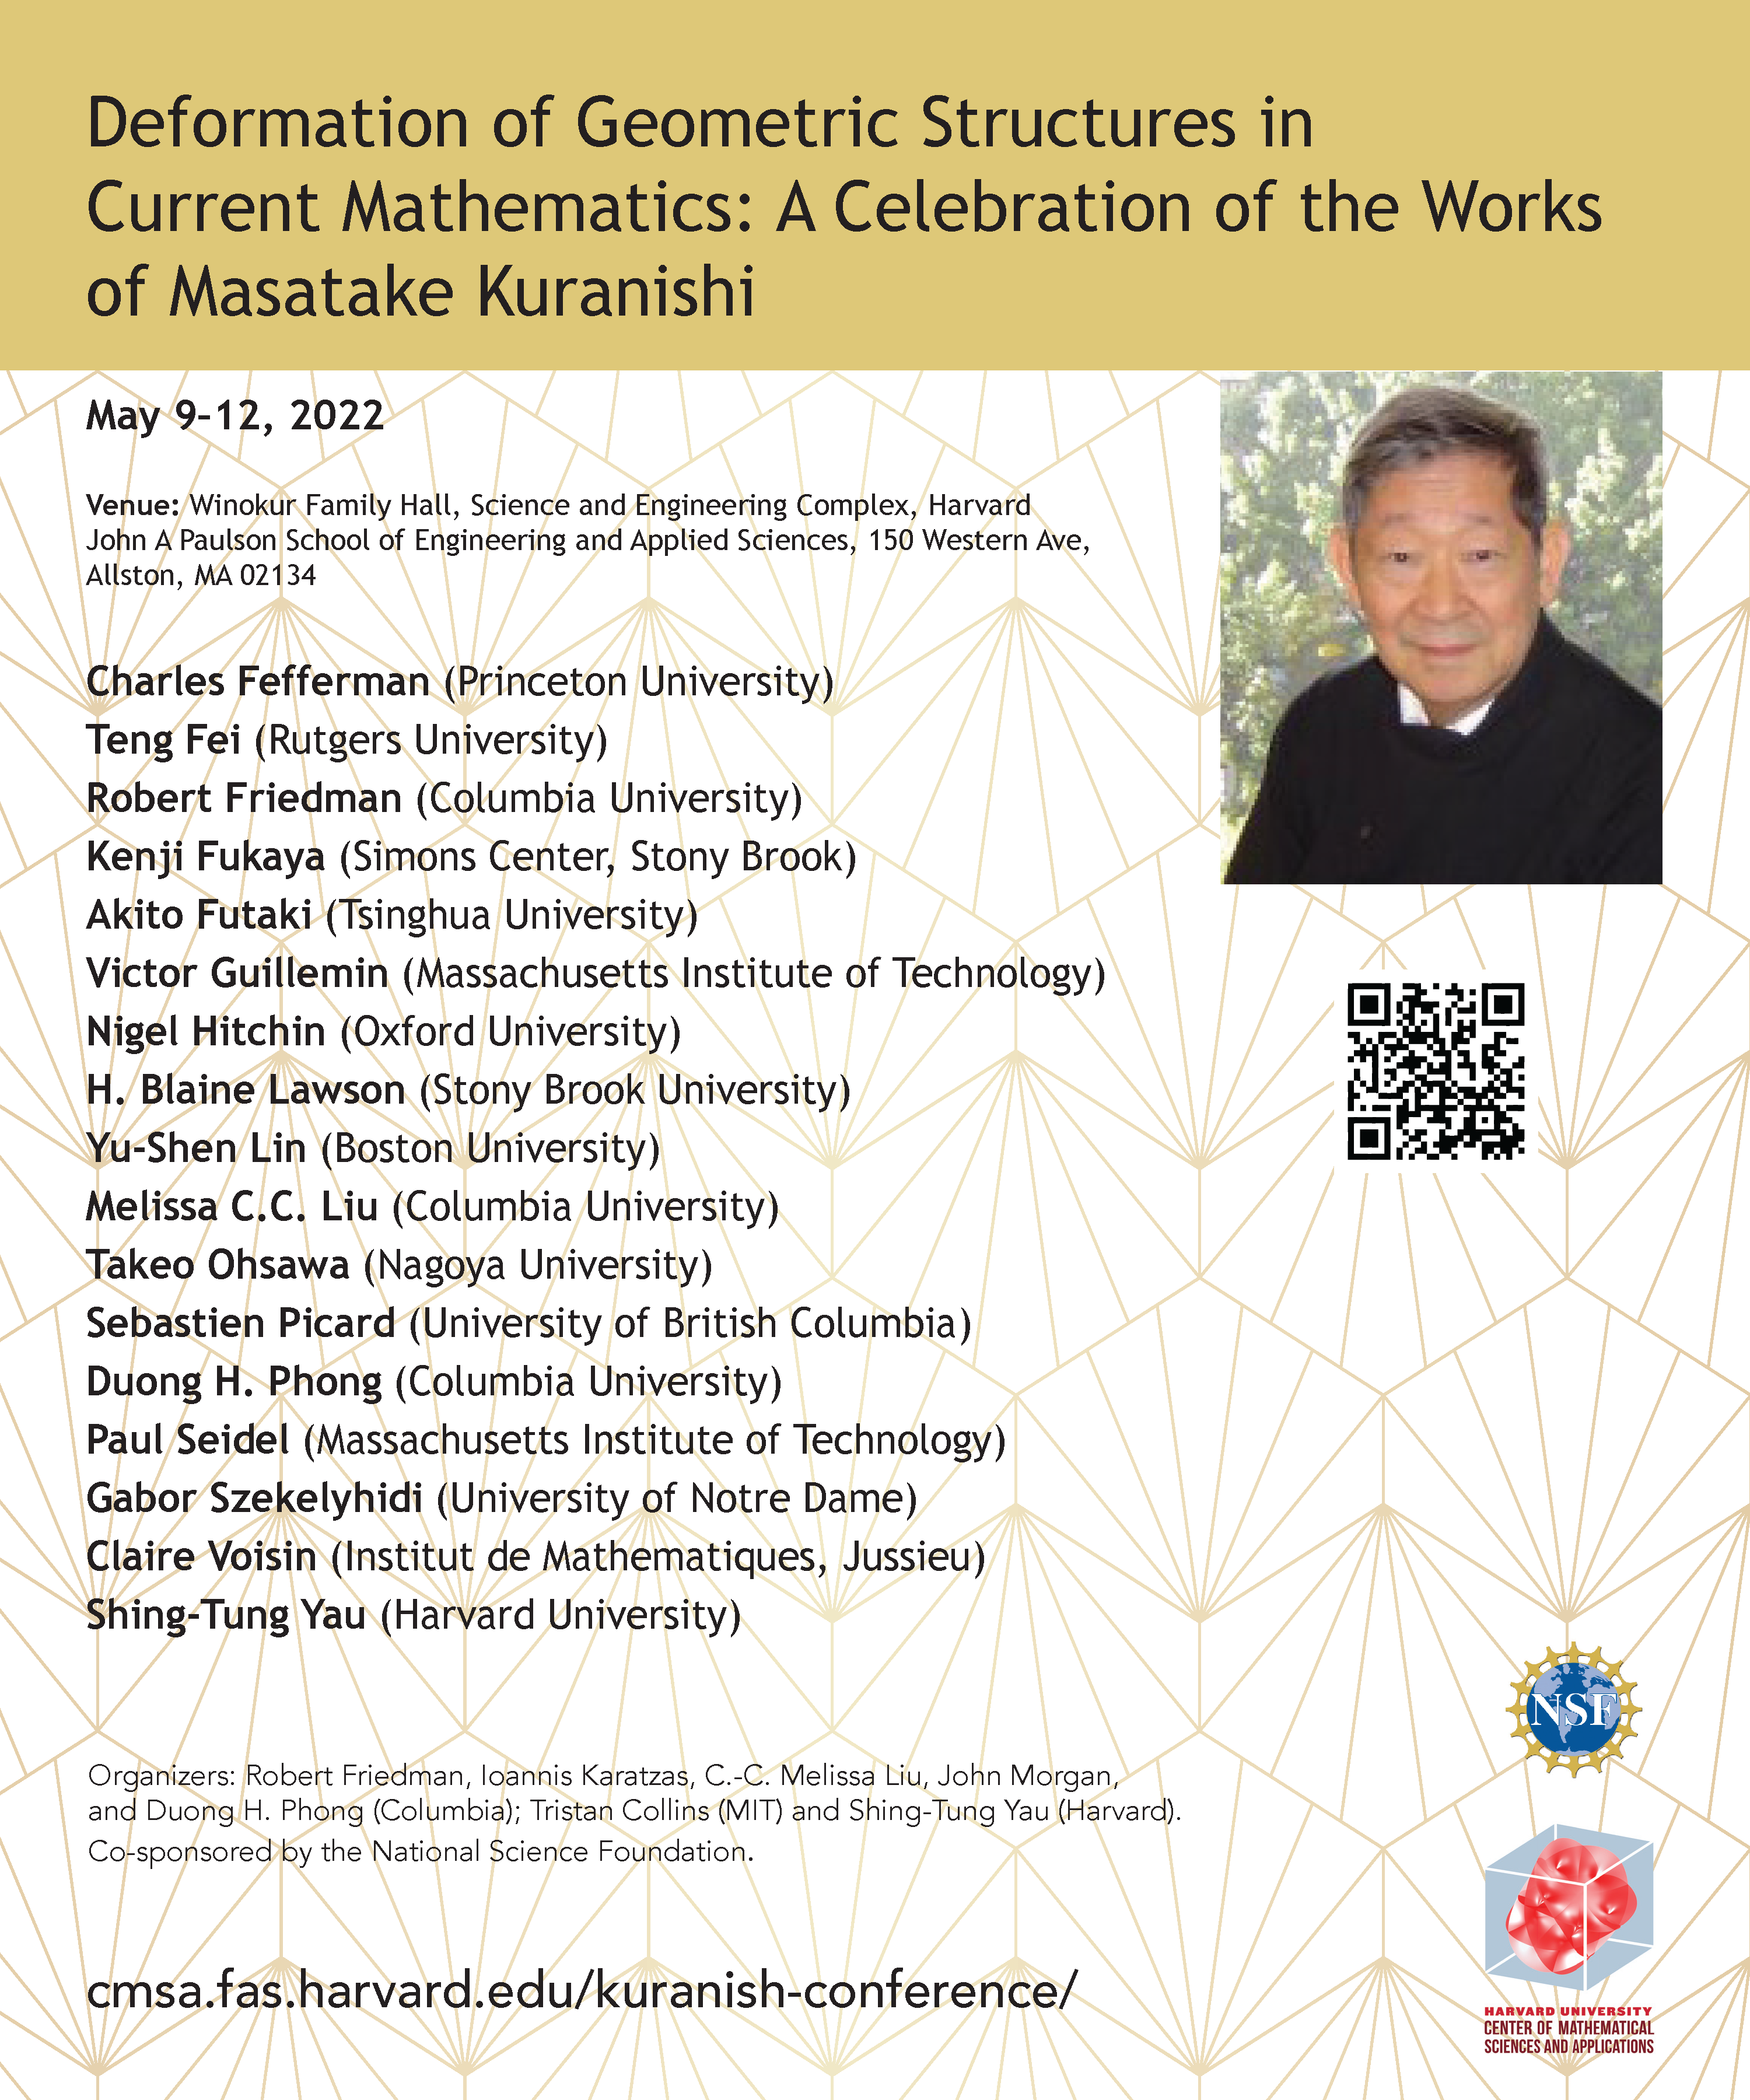 Deformation of Geometric Structures in Current Mathematics: A celebration of the works of Masatake Kuranishi